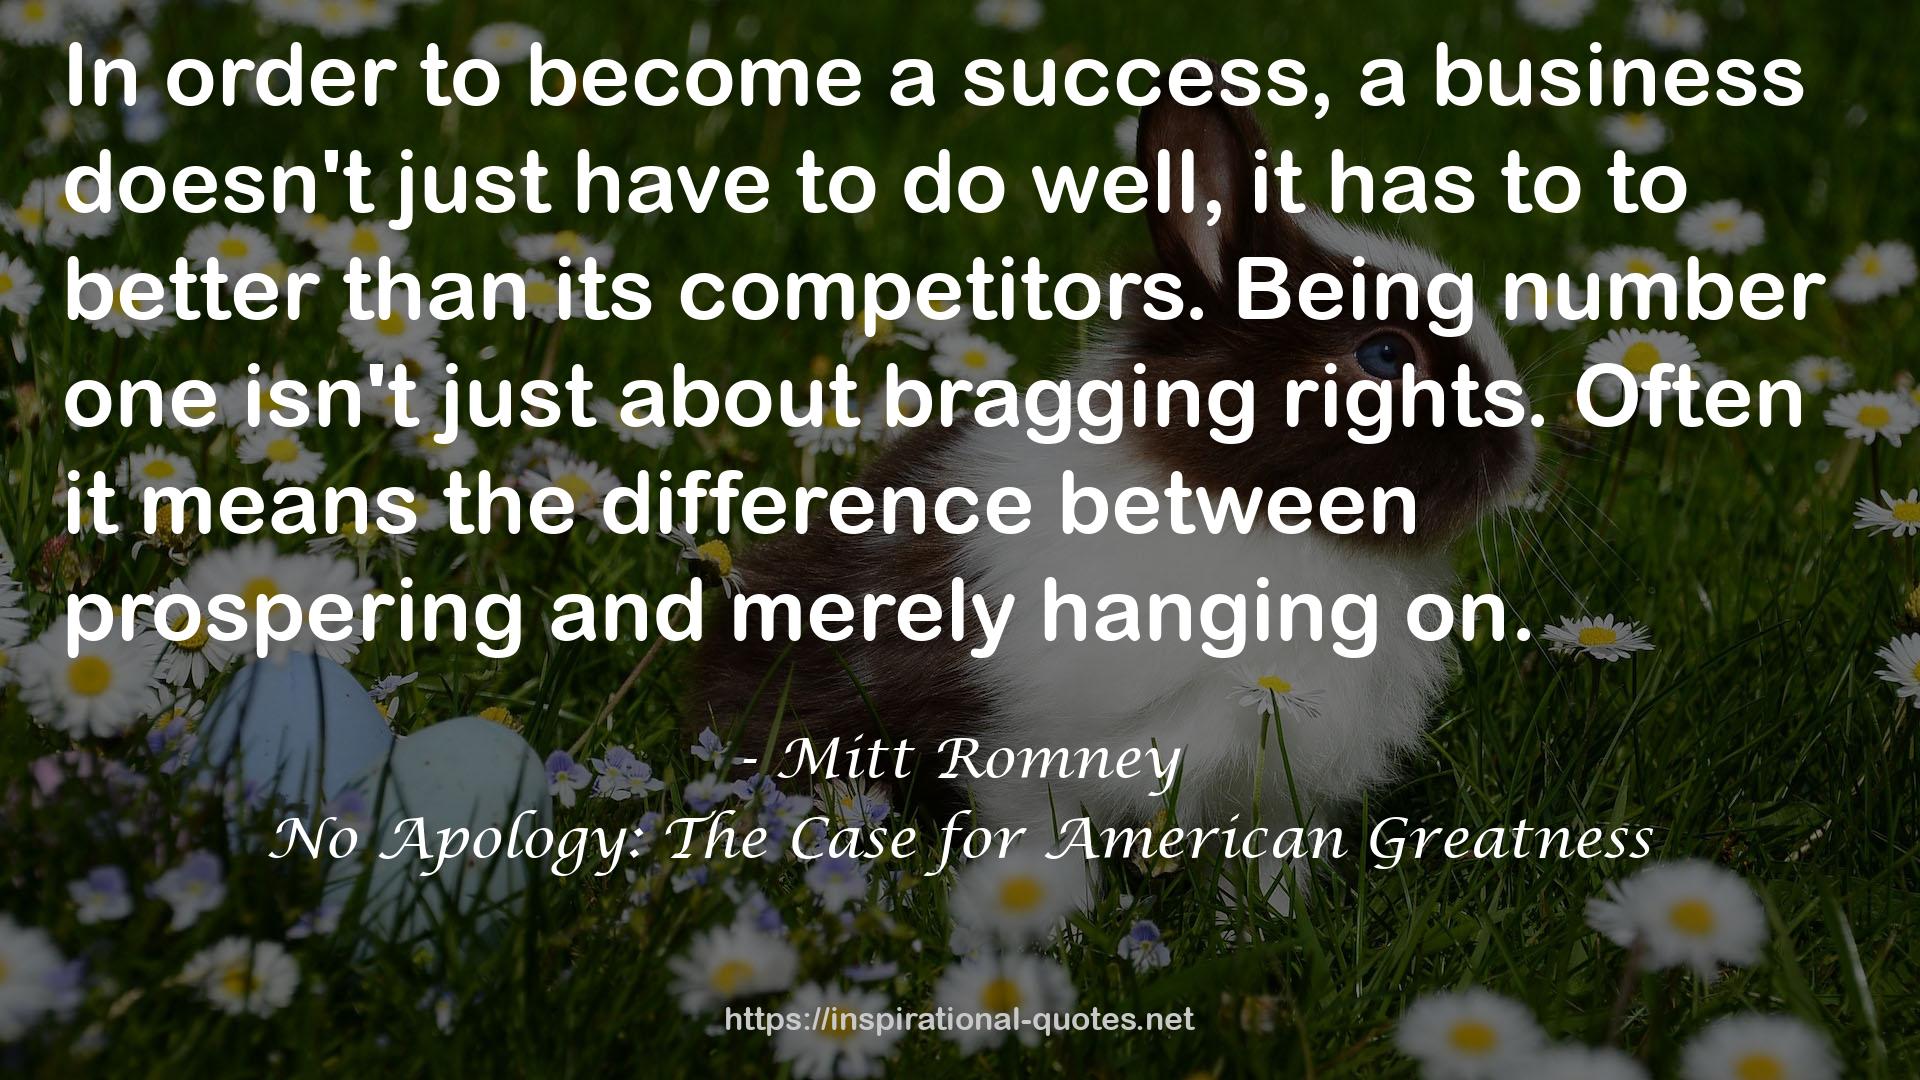 No Apology: The Case for American Greatness QUOTES